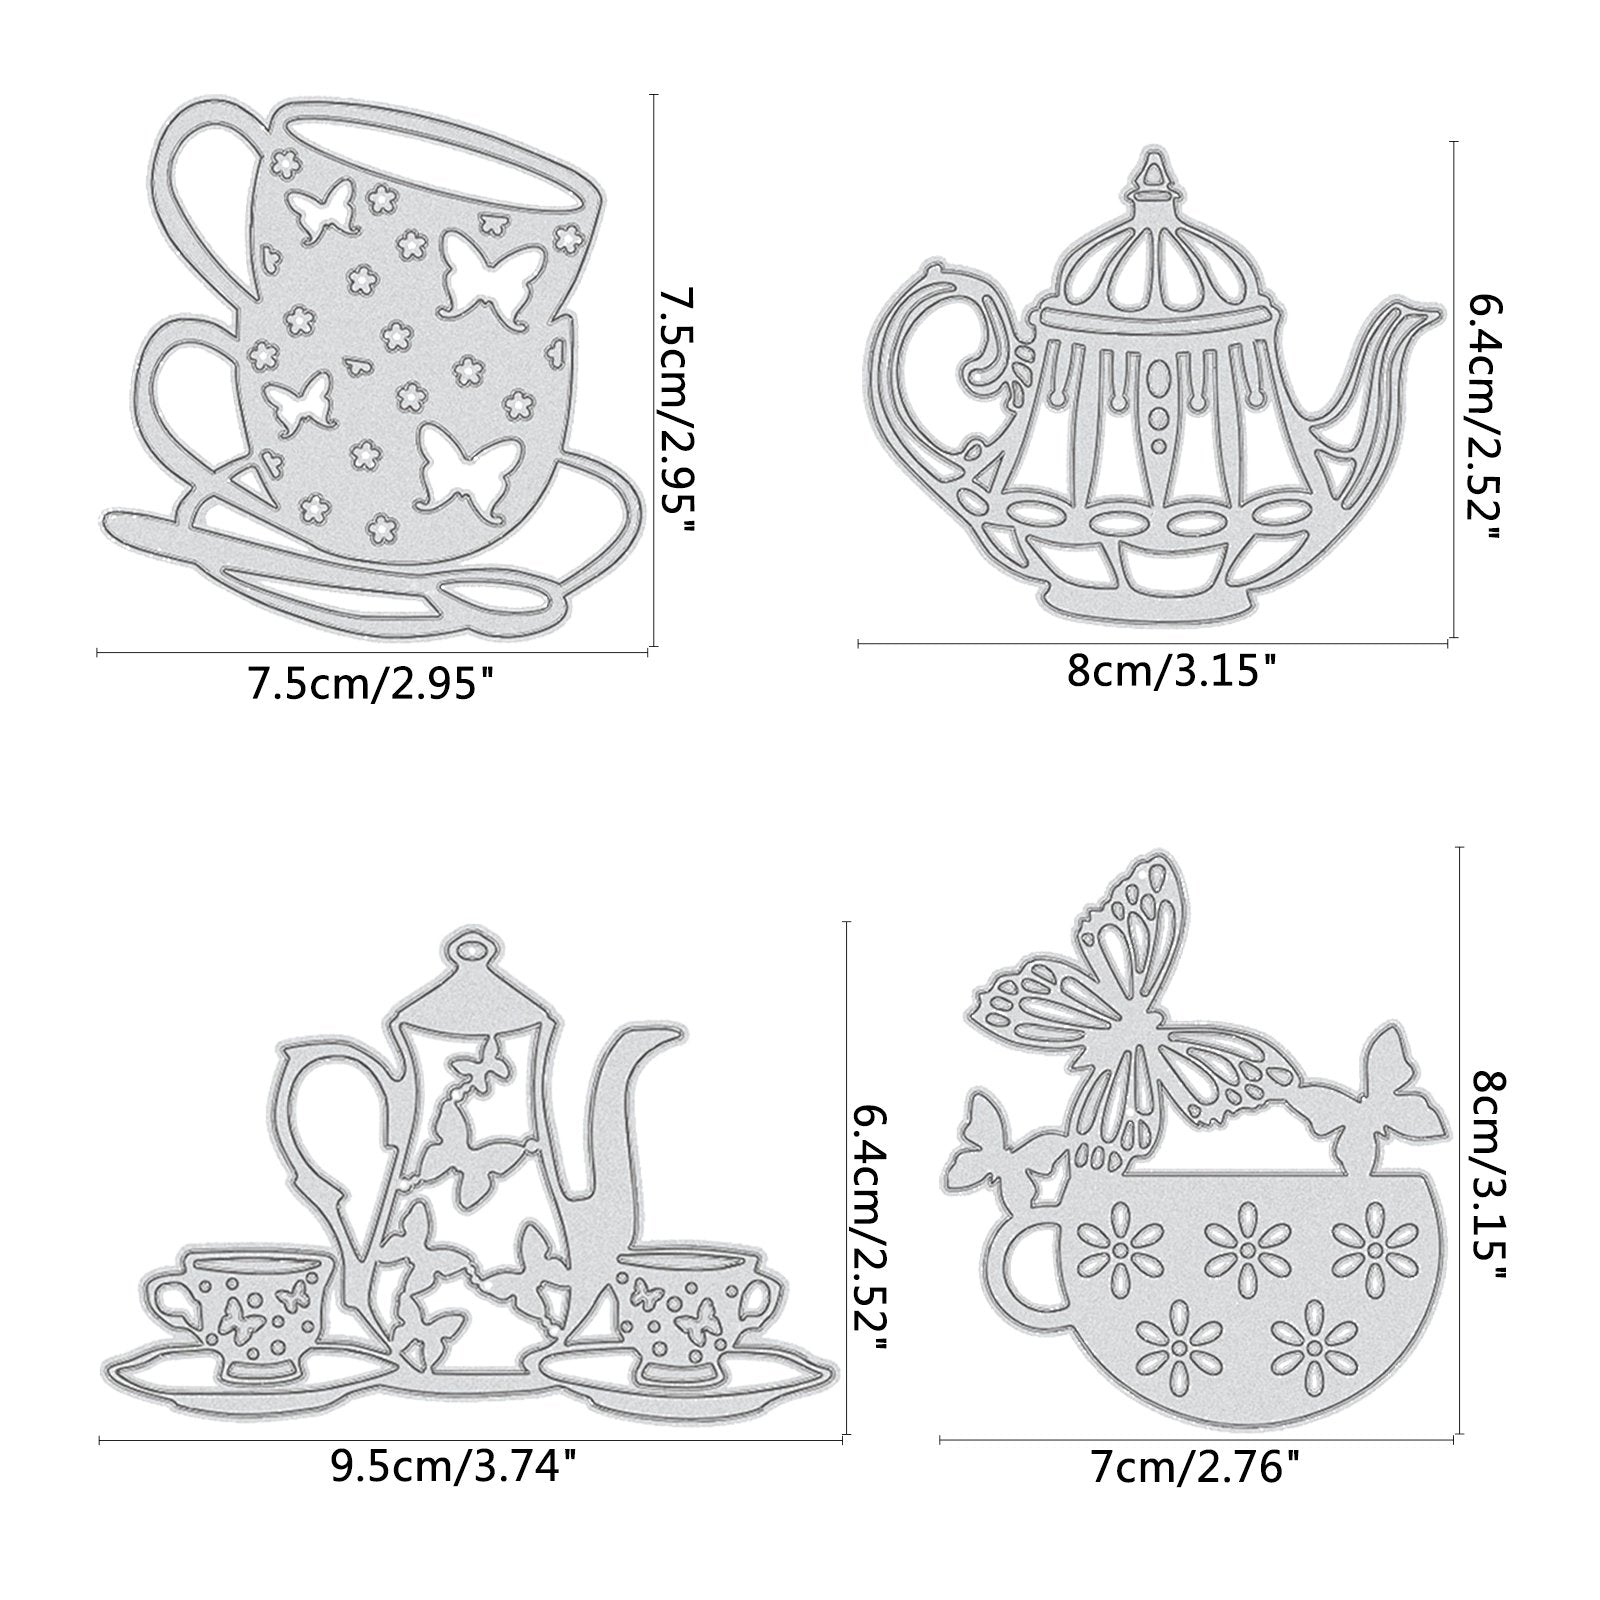 Pcs metal teapot tea cup cutting dies tea cup with butterfly